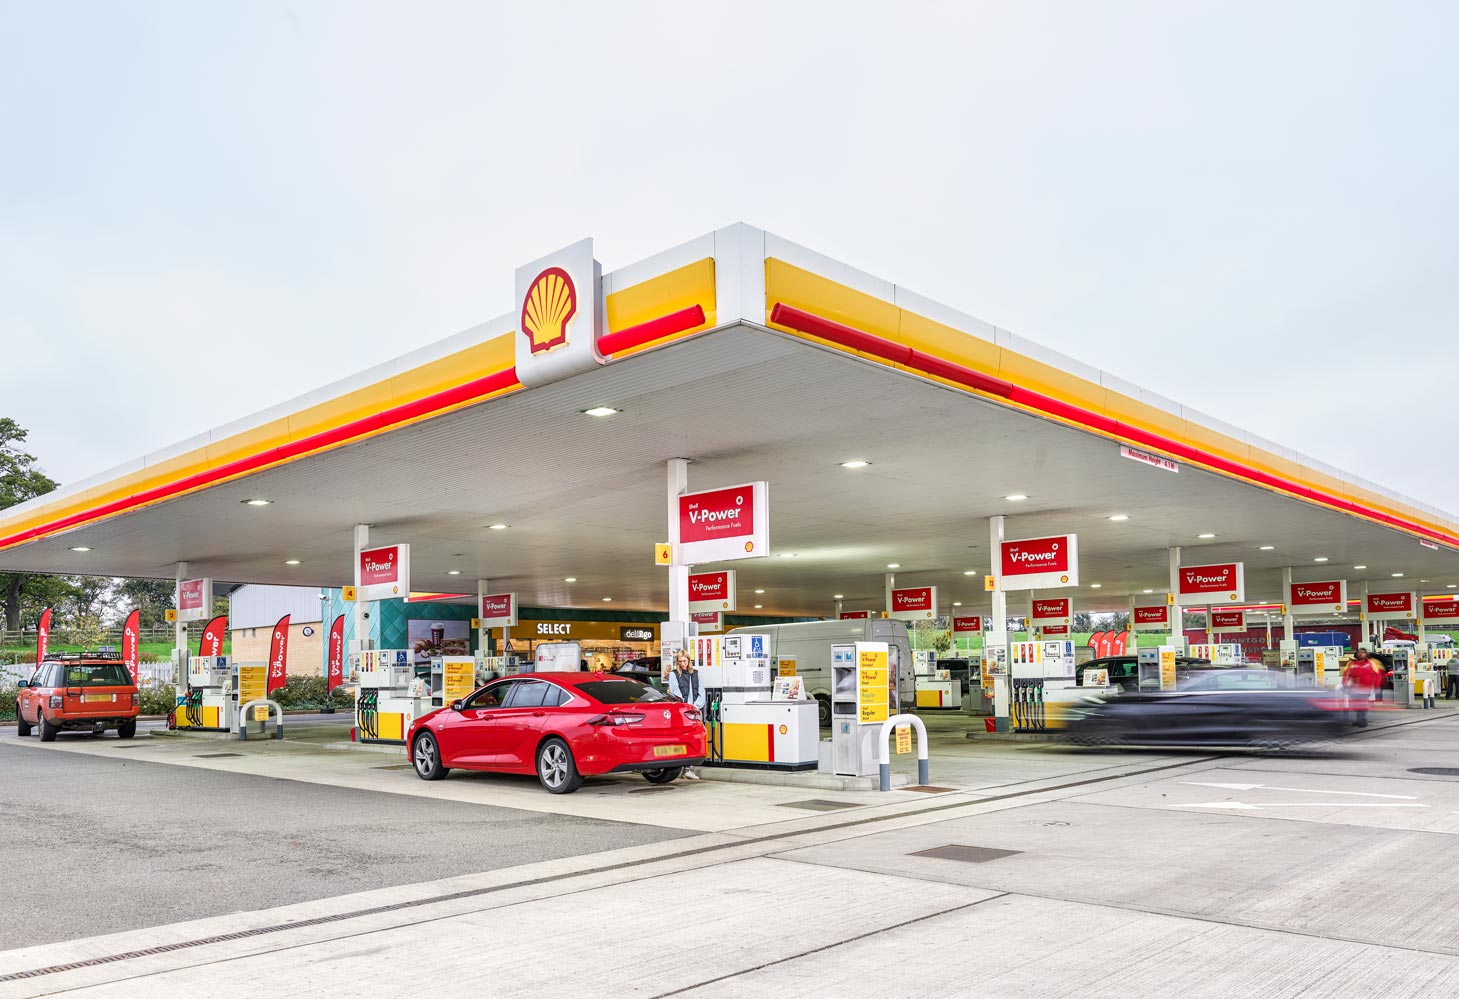 Shell to grow company-owned retail sites in the U.S.